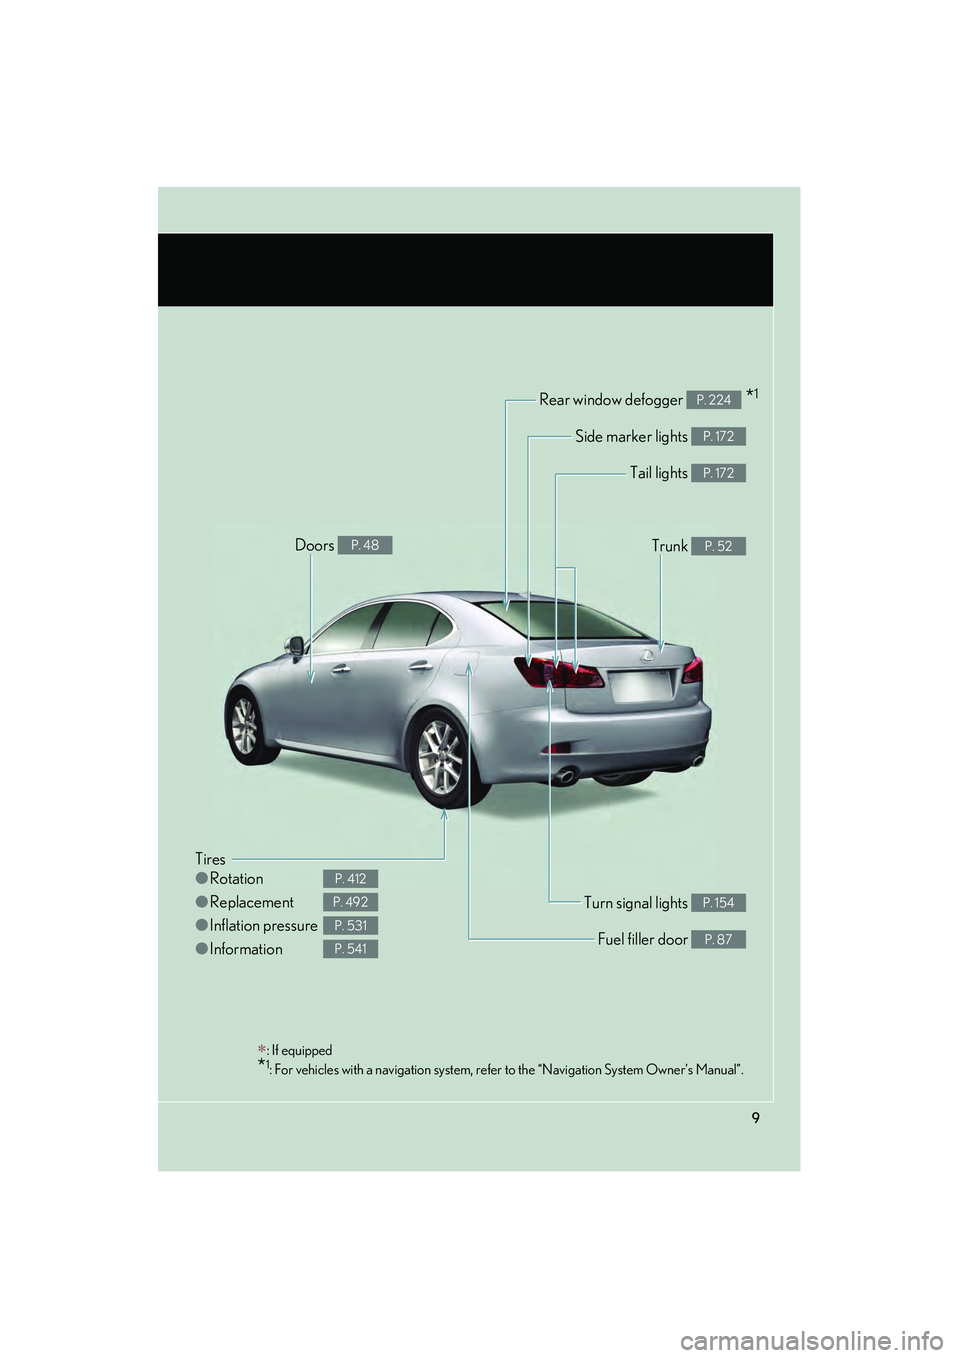 Lexus IS250 2012  Owners Manual IS350/250_U
9
Tires
●Rotation
● Replacement
● Inflation pressure
● Information
P. 412
P. 492
P. 531
P. 541
Tail lights P. 172
Side marker lights P. 172
Trunk P. 52
Rear window defogger  *1P. 2